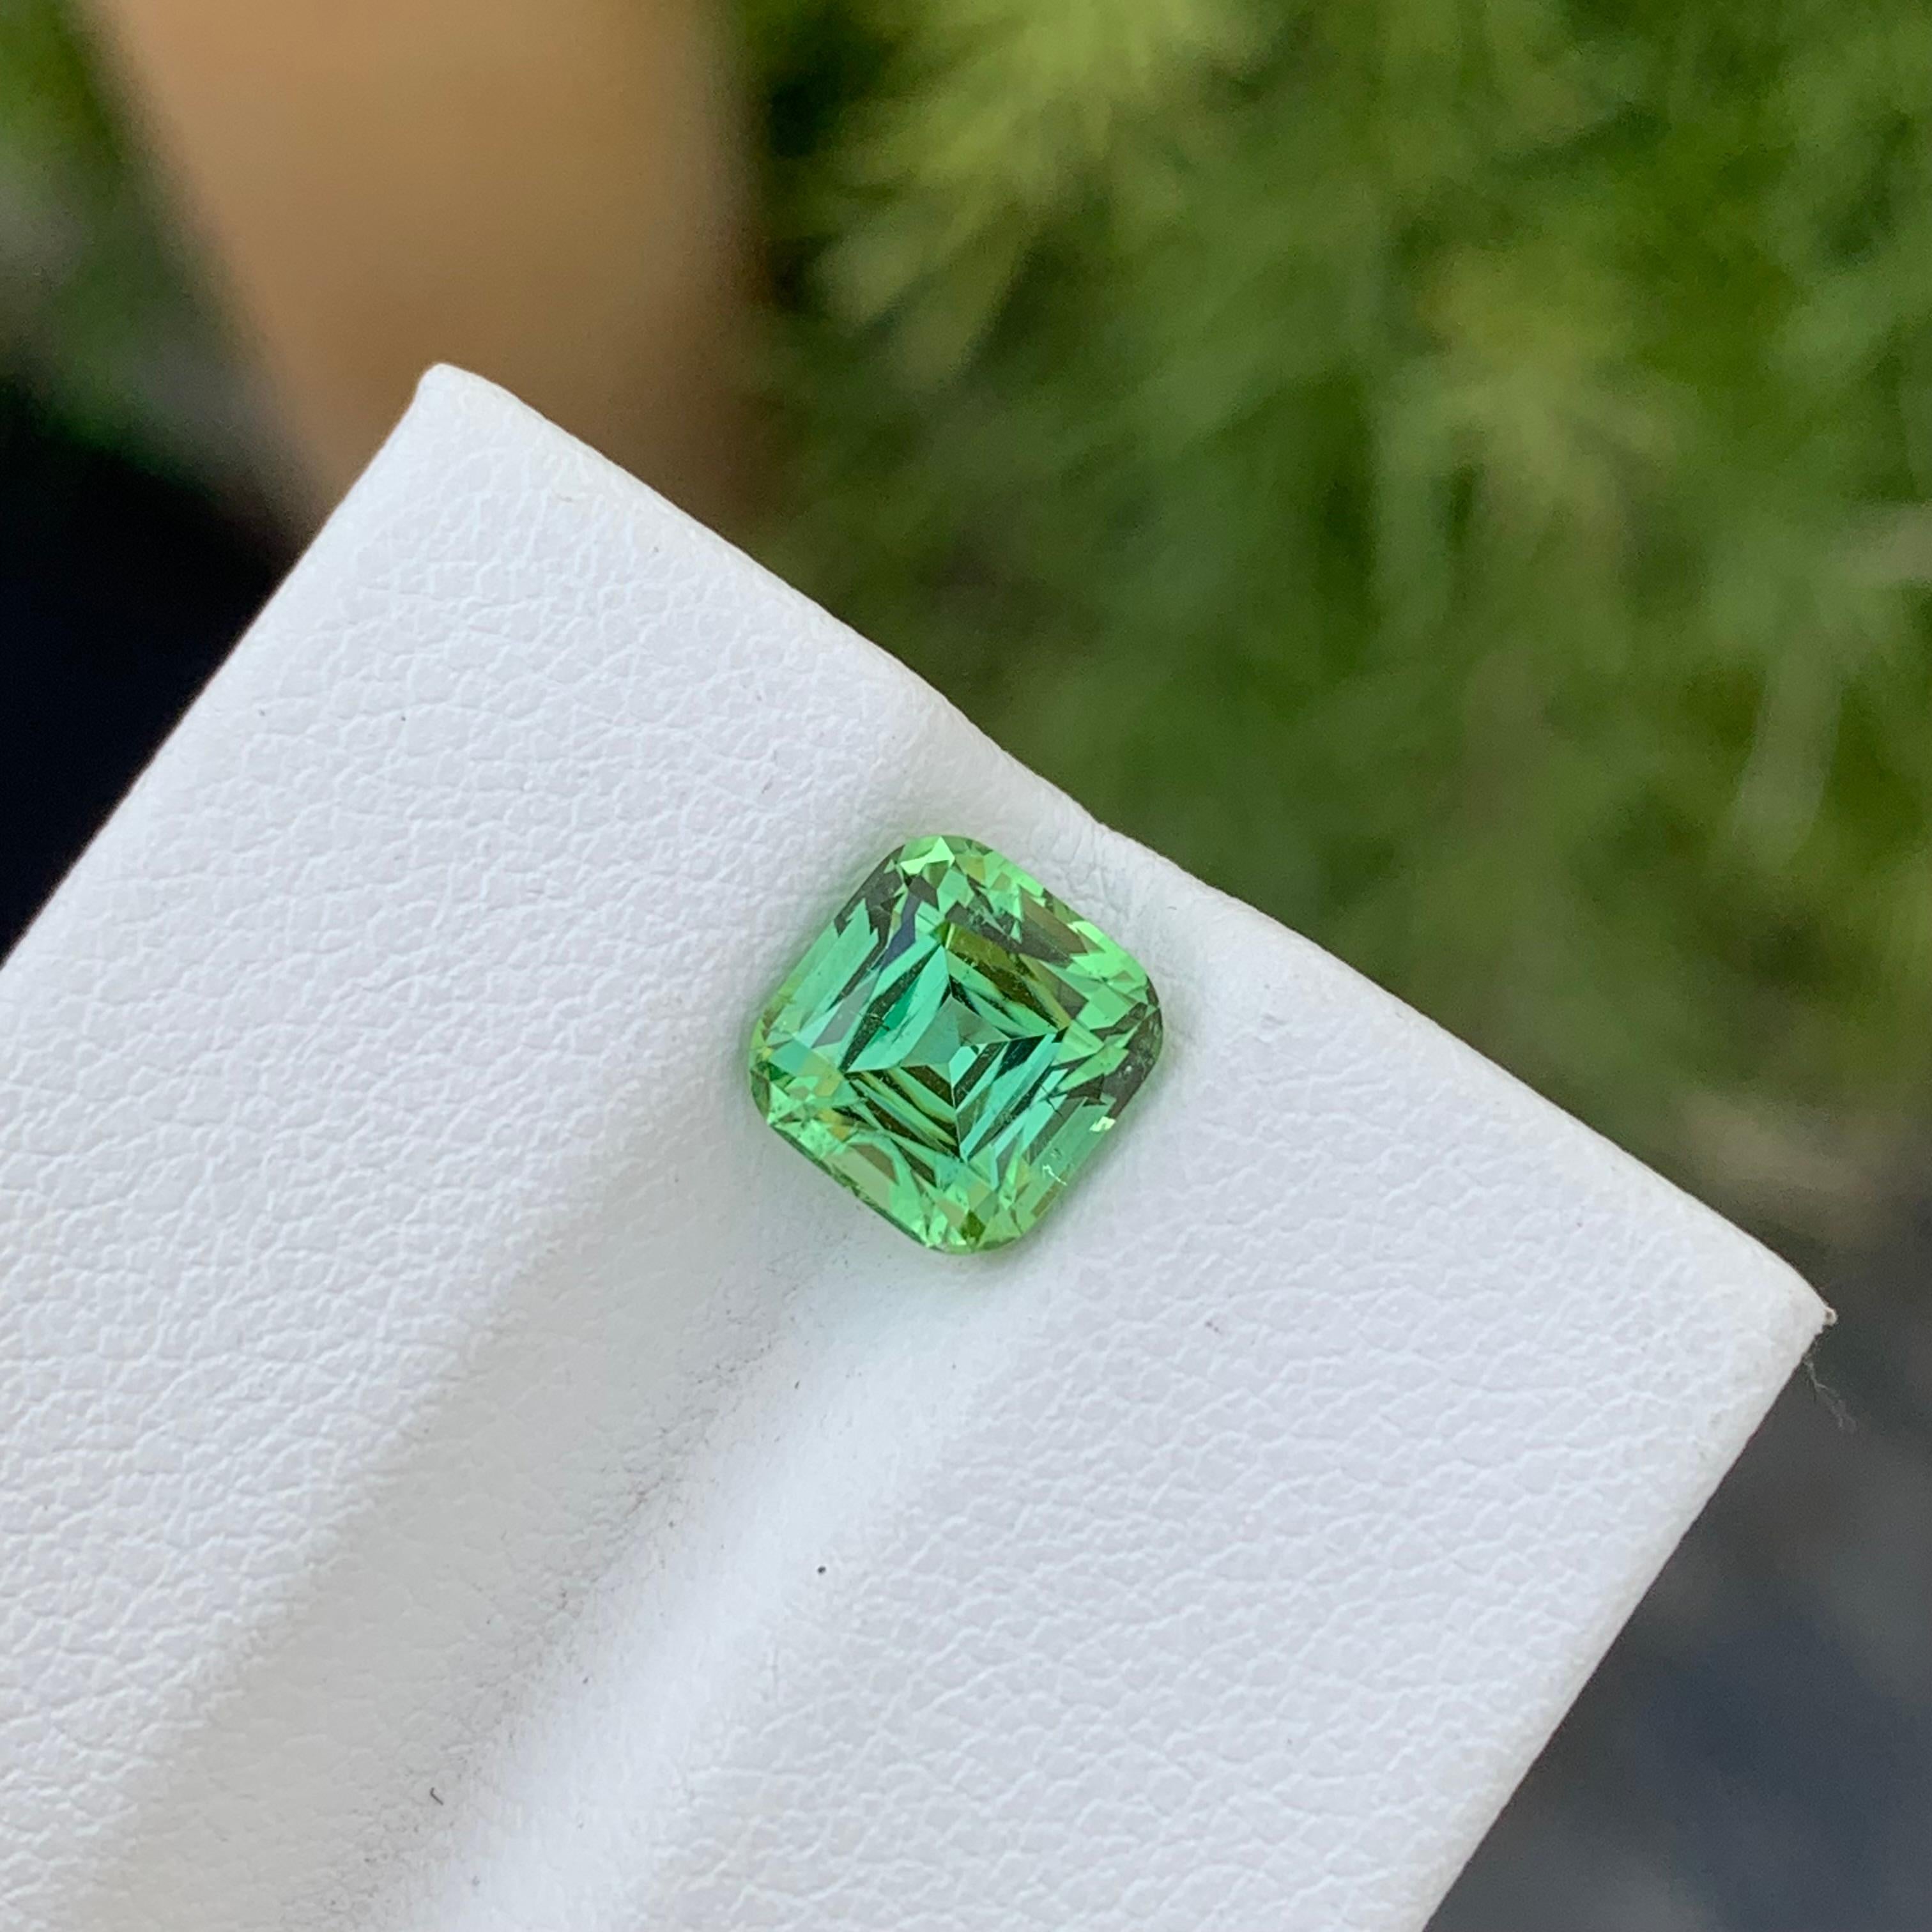 Loose Green Tourmaline
Weight: 2.15 Carats
Dimension: 6.9 x 7.2 x 5.5 Mm
Colour: Green
Origin: Afghanistan
Certificate: On Demand
Treatment: Non

Tourmaline is a captivating gemstone known for its remarkable variety of colors, making it a favorite